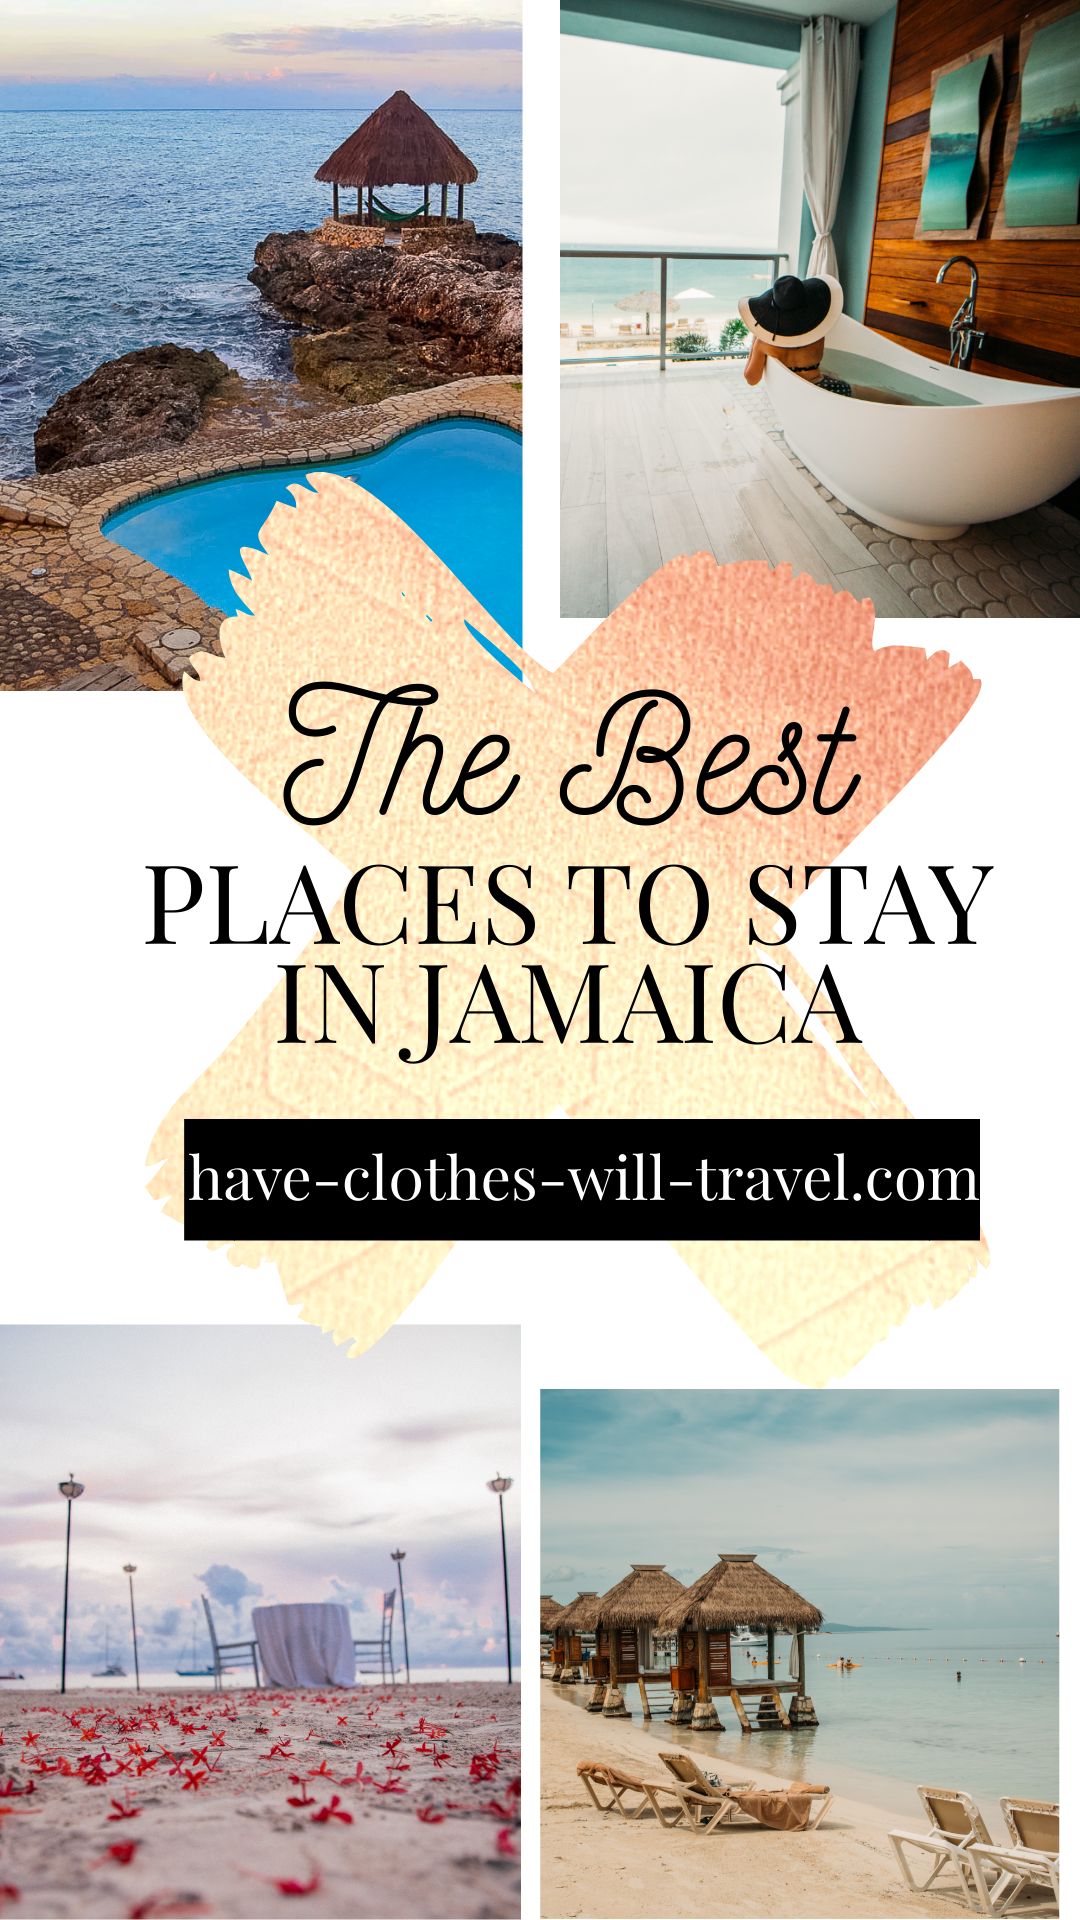 A collage of images of the best resorts in Jamaica show the ocean, all-inclusive amenities, and things to do. Text in the center of the image says "the best places to day in Jamaica"